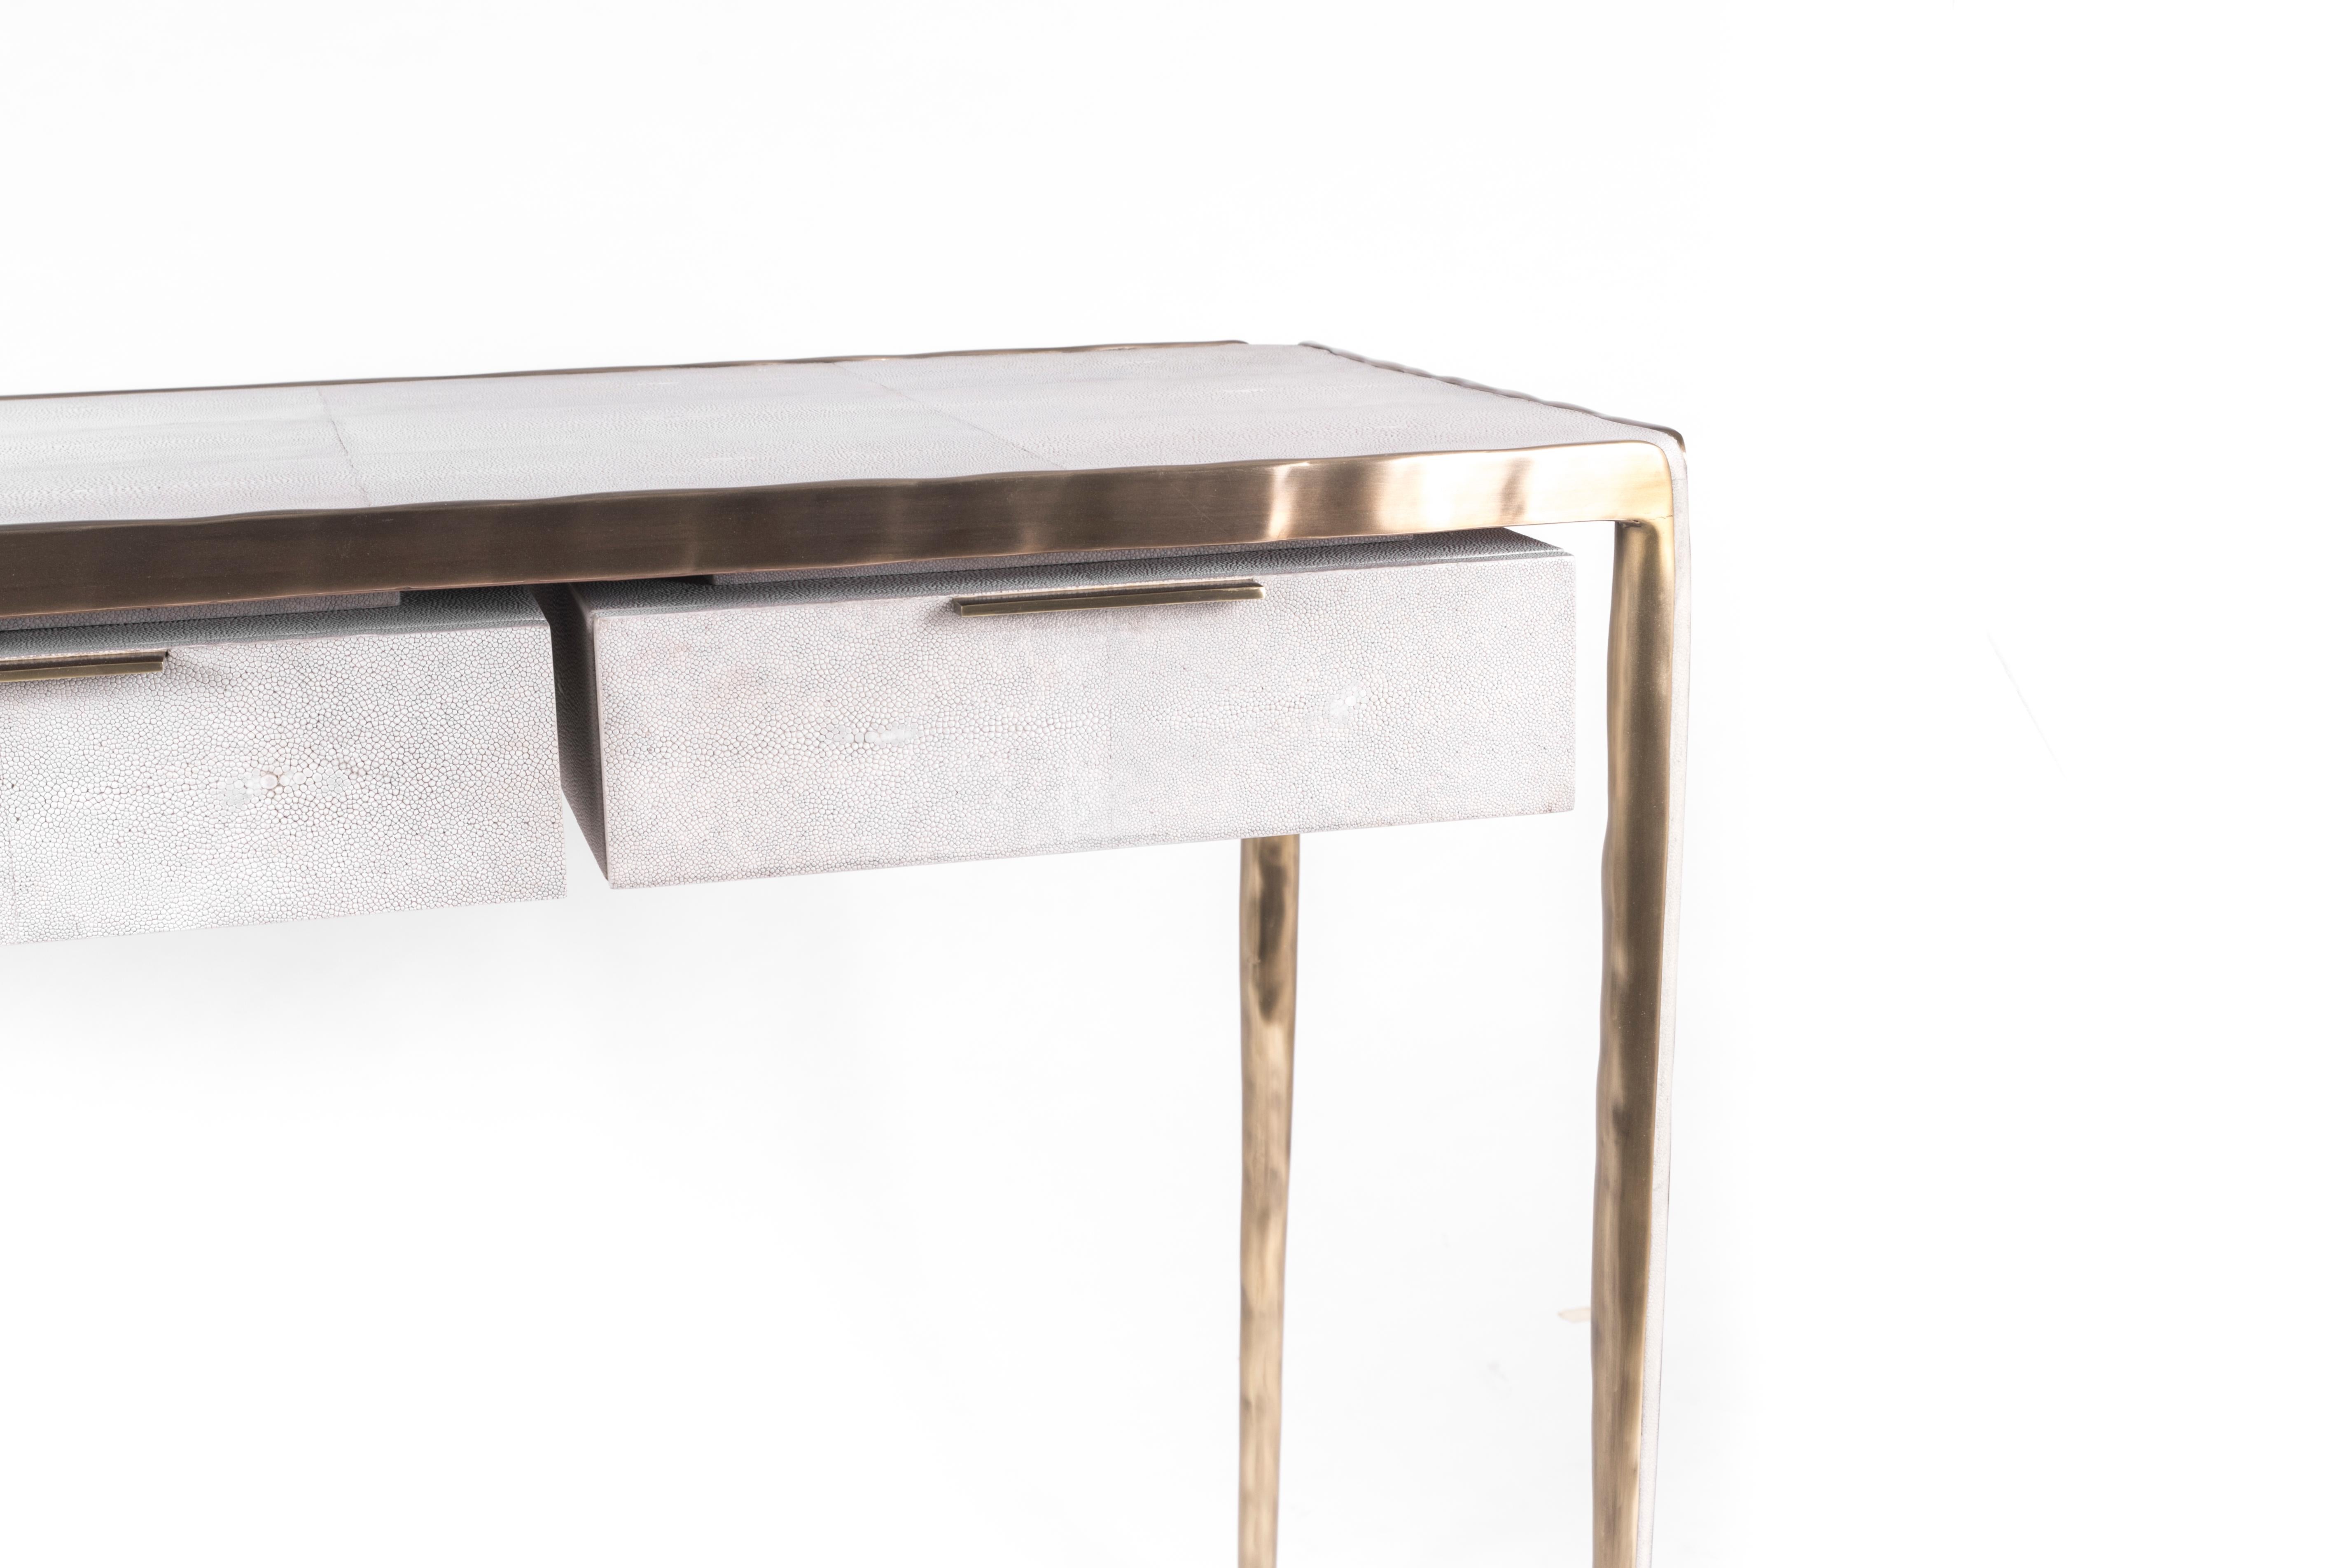 The melting writing desk's simple but elegant design, makes for an adaptable neutral piece of furniture. The cream shagreen top is framed with an irregular surface bronze-patina brass that creates the 